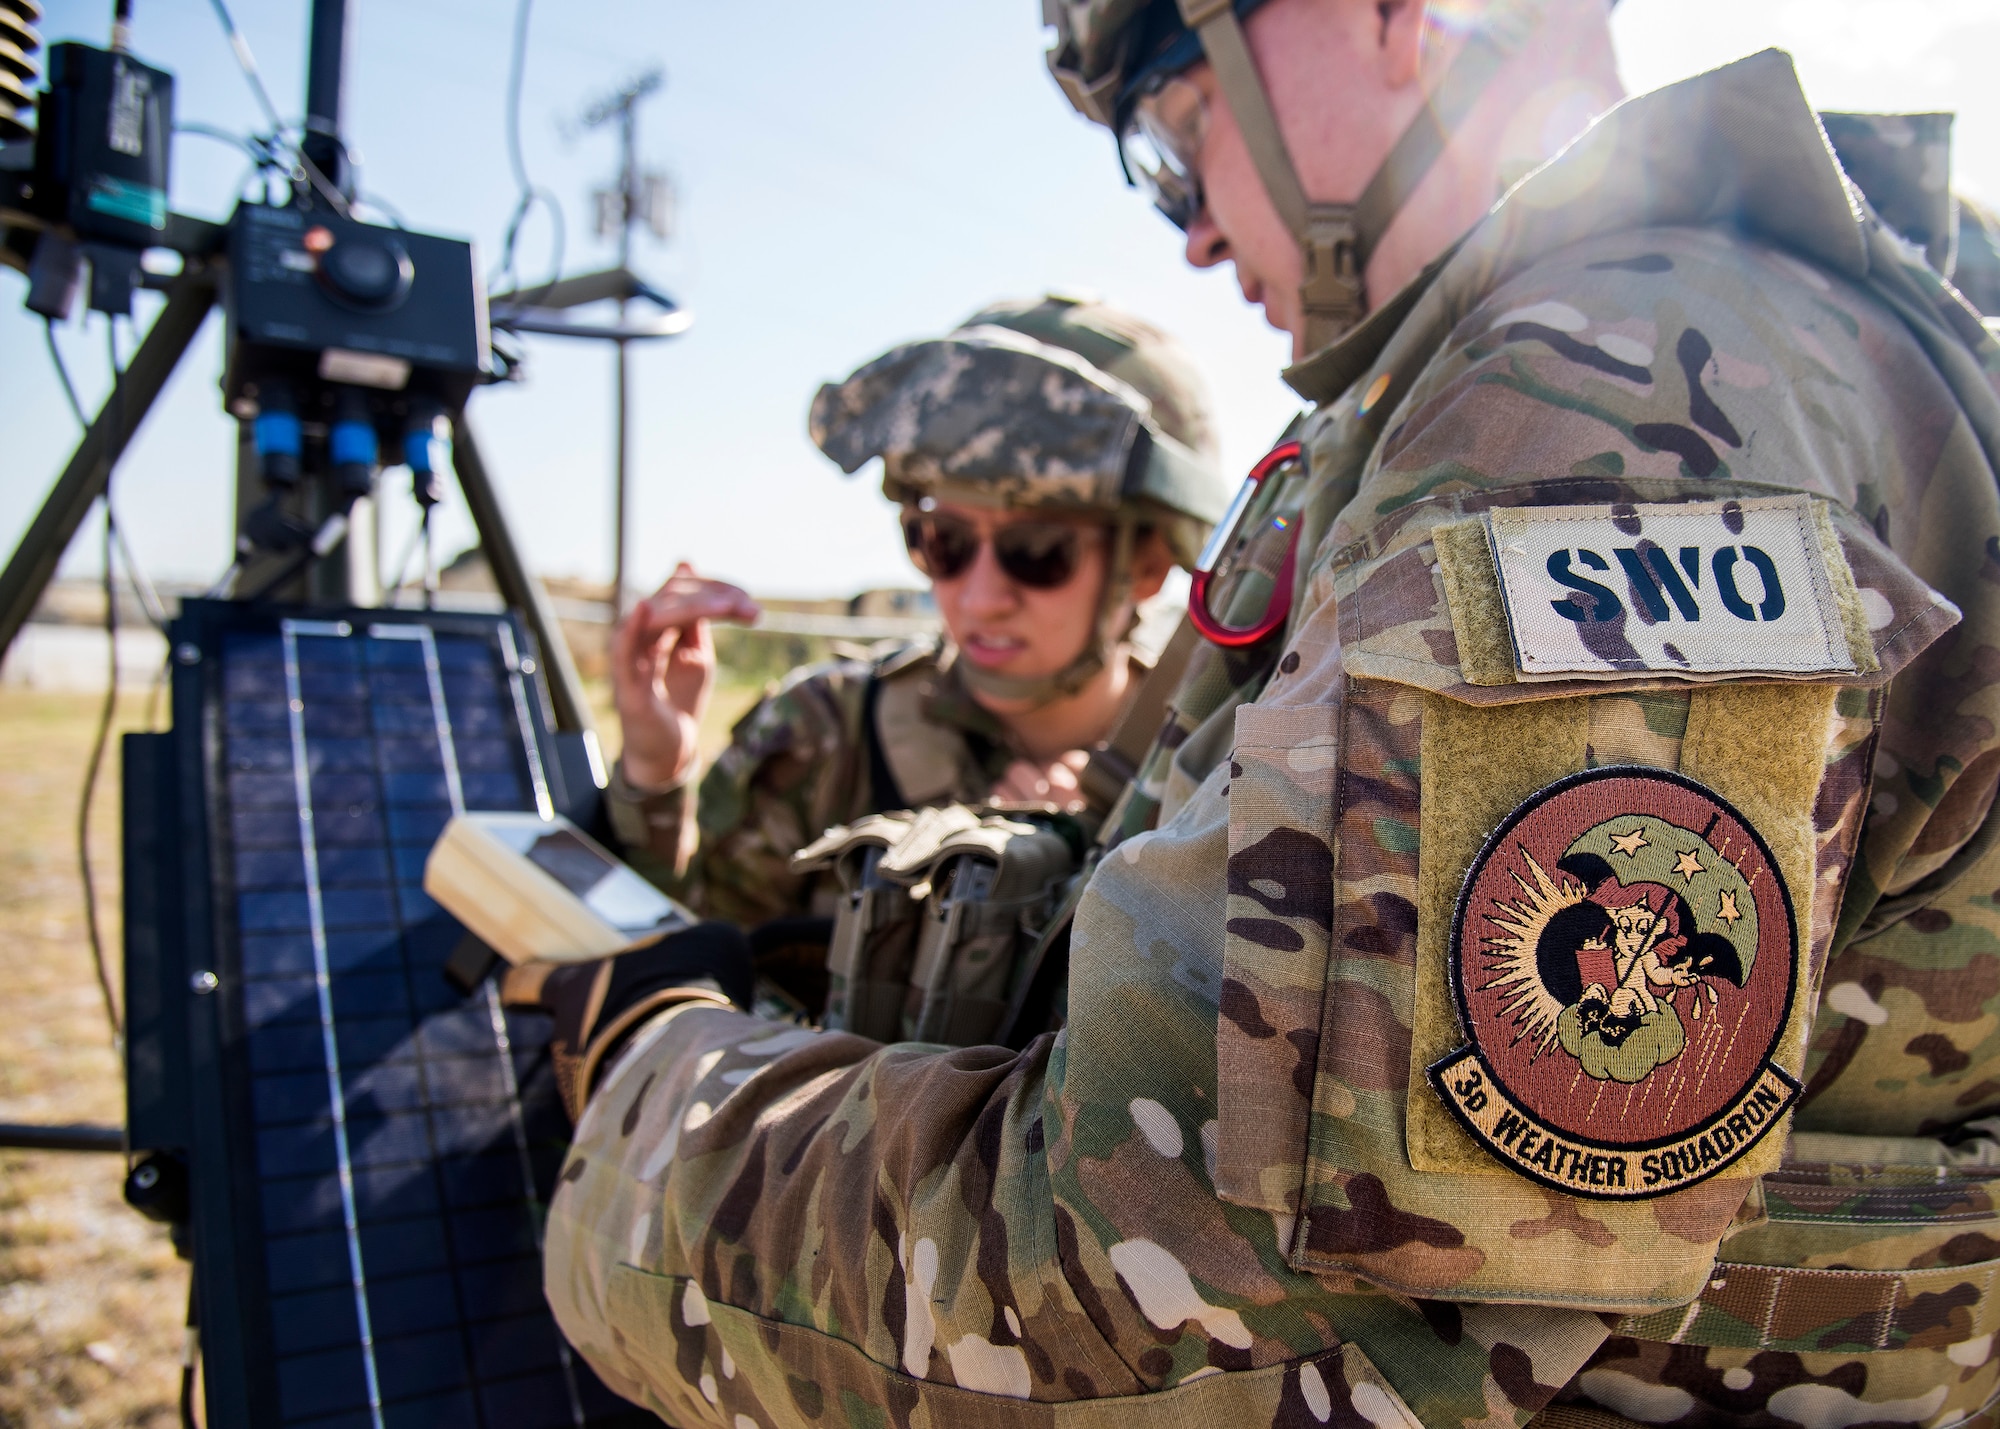 Staff Weather Officers (SWO) from the 3d Weather Squadron (WS), inspect a tactical meteorlogical observing system, during a certification field exercise (CFX), July 29, 2019, at Camp Bowie Training Center, Texas. The CFX was designed to evaluate the squadron’s overall tactical ability and readiness to provide the U.S. Army with full spectrum environmental support to the Joint Task Force (JTF) fight. While deployed, the Army relies on the 3d WS to provide them with current ground weather reports. These reports are then employed by commanders on the ground as they plan the best tactics and approaches to accomplish the mission. (U.S. Air Force photo by Airman 1st Class Eugene Oliver)